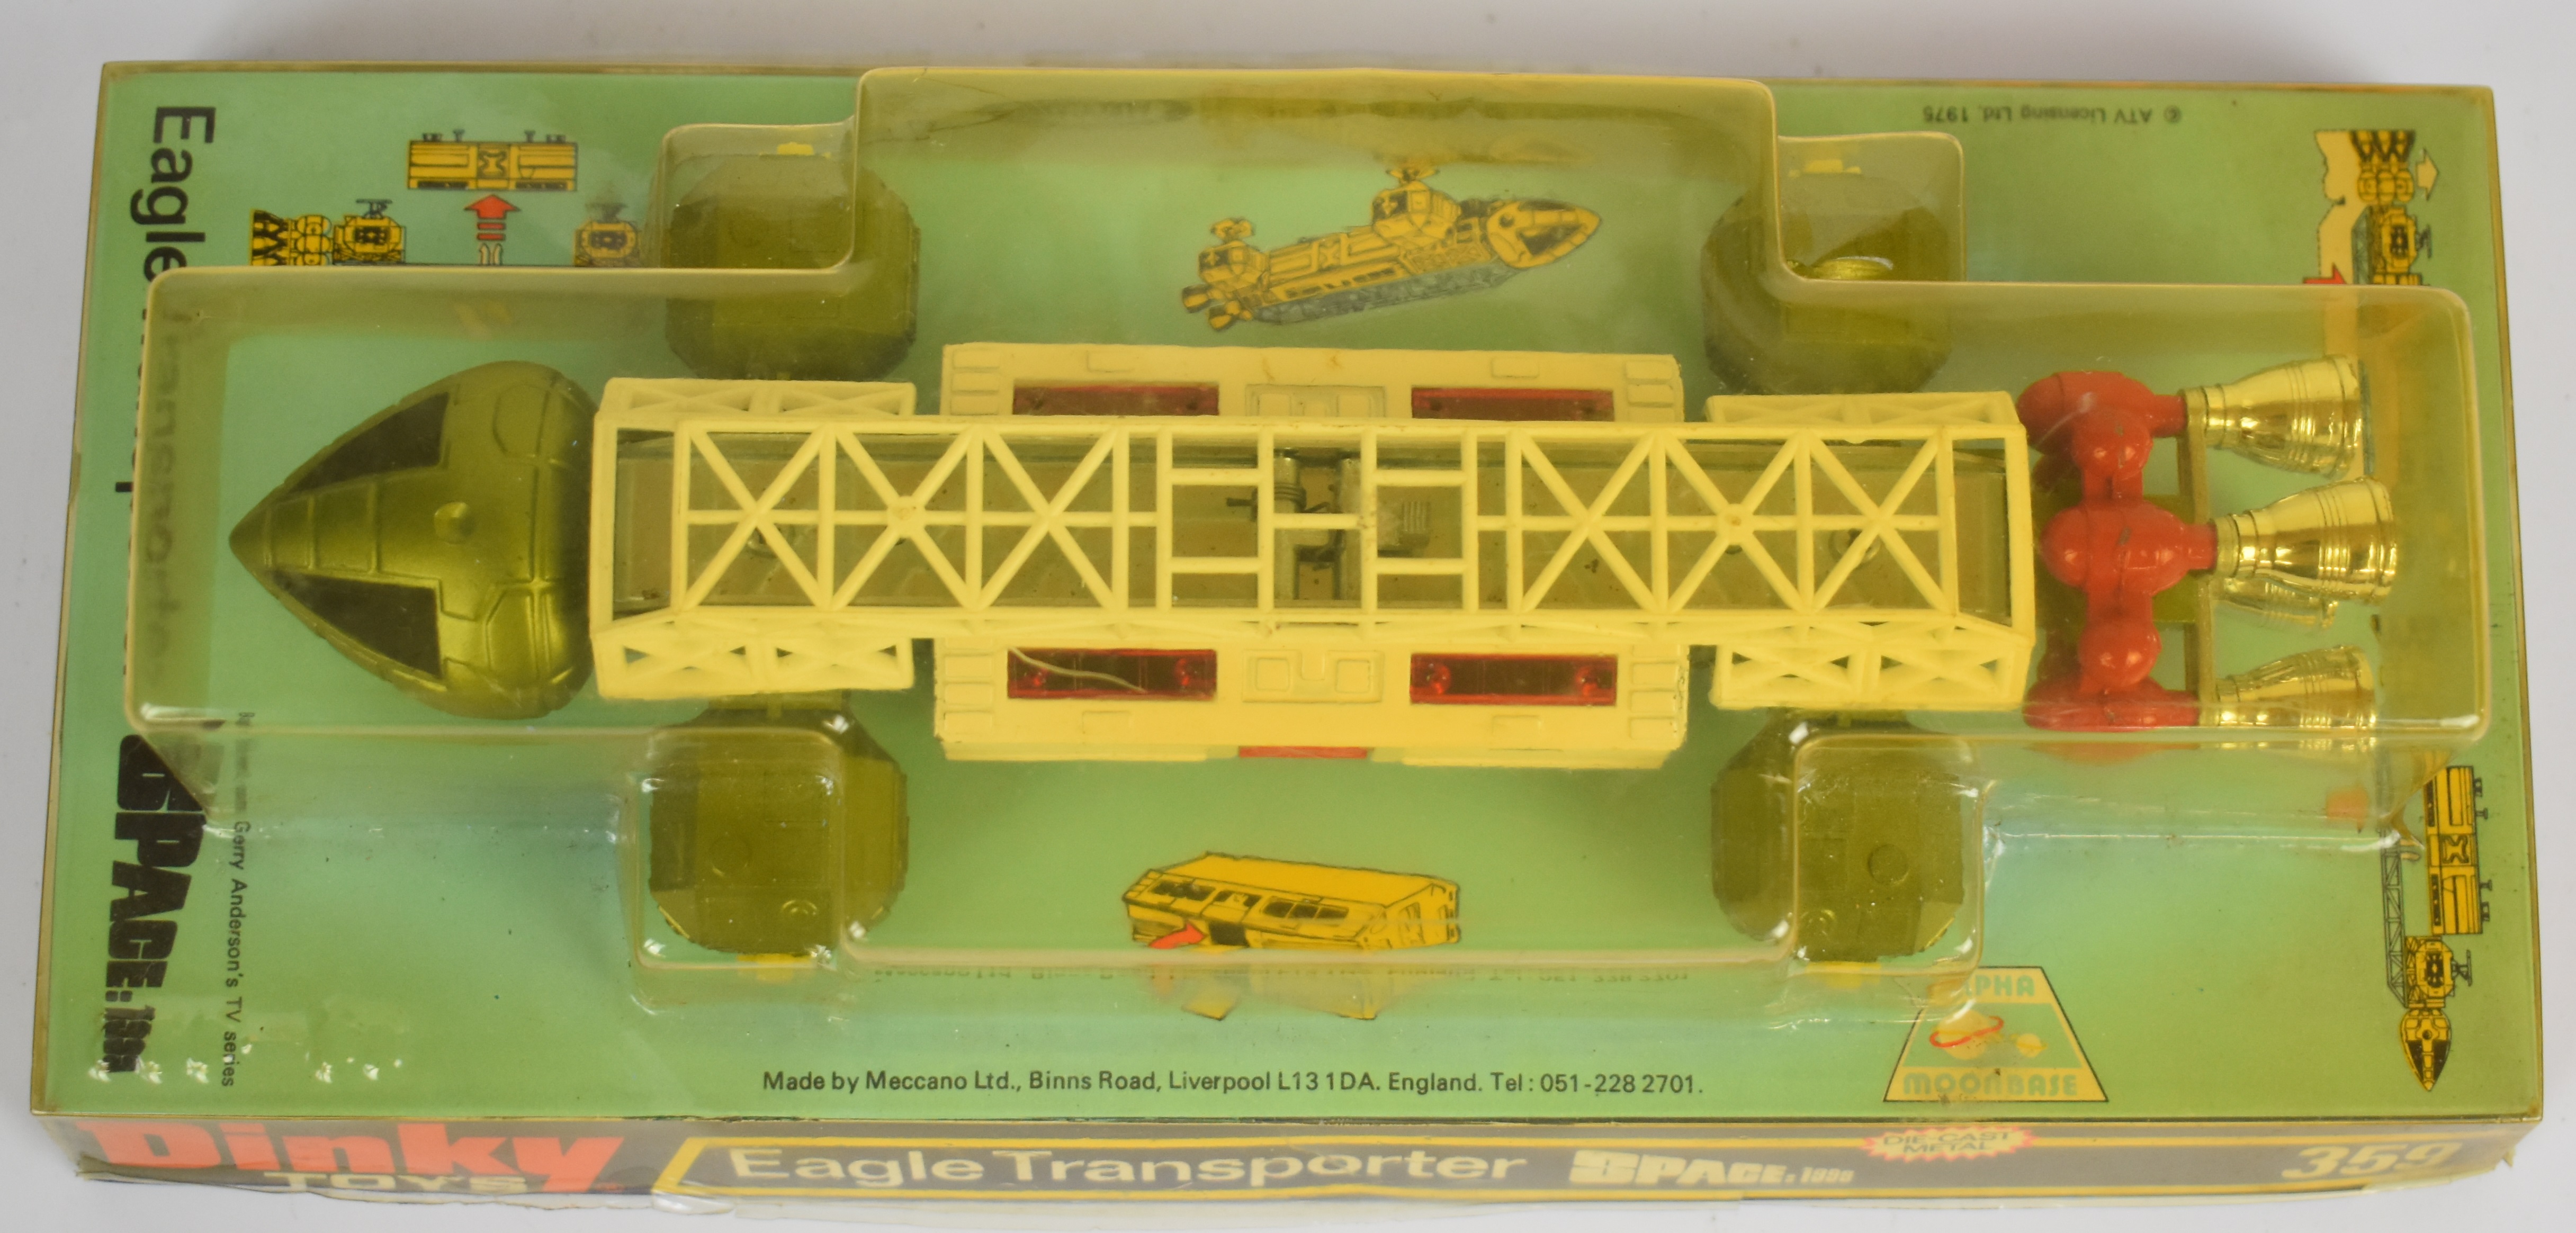 Dinky Toys Space:1999 diecast model Eagle Transporter, 359, in original bubble display box. - Image 2 of 3